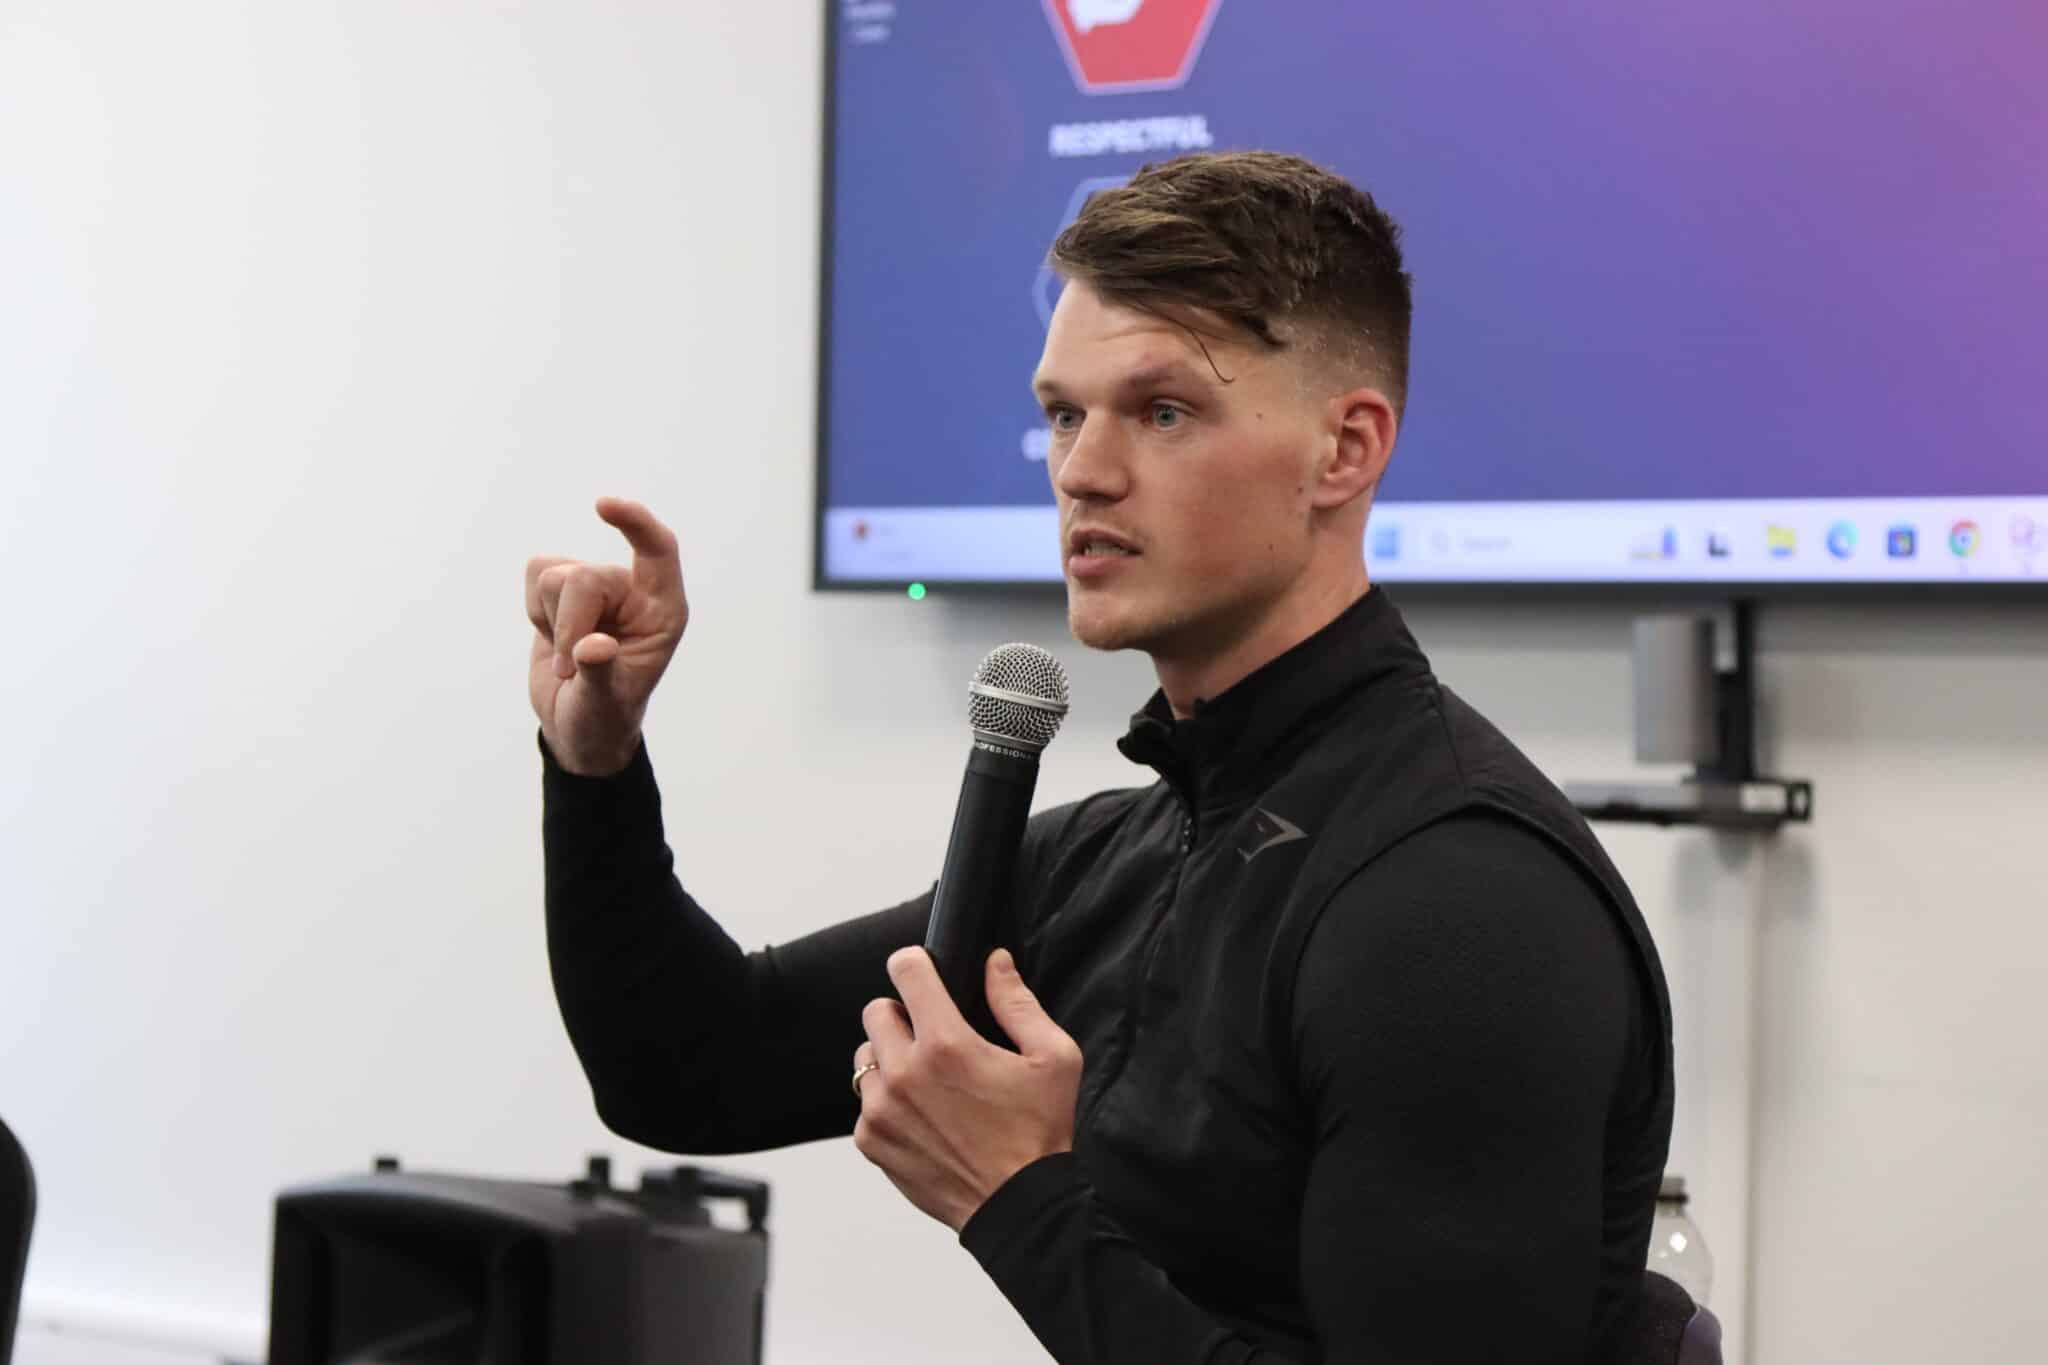 Ben Francis from Gymshark talking with a mic to students